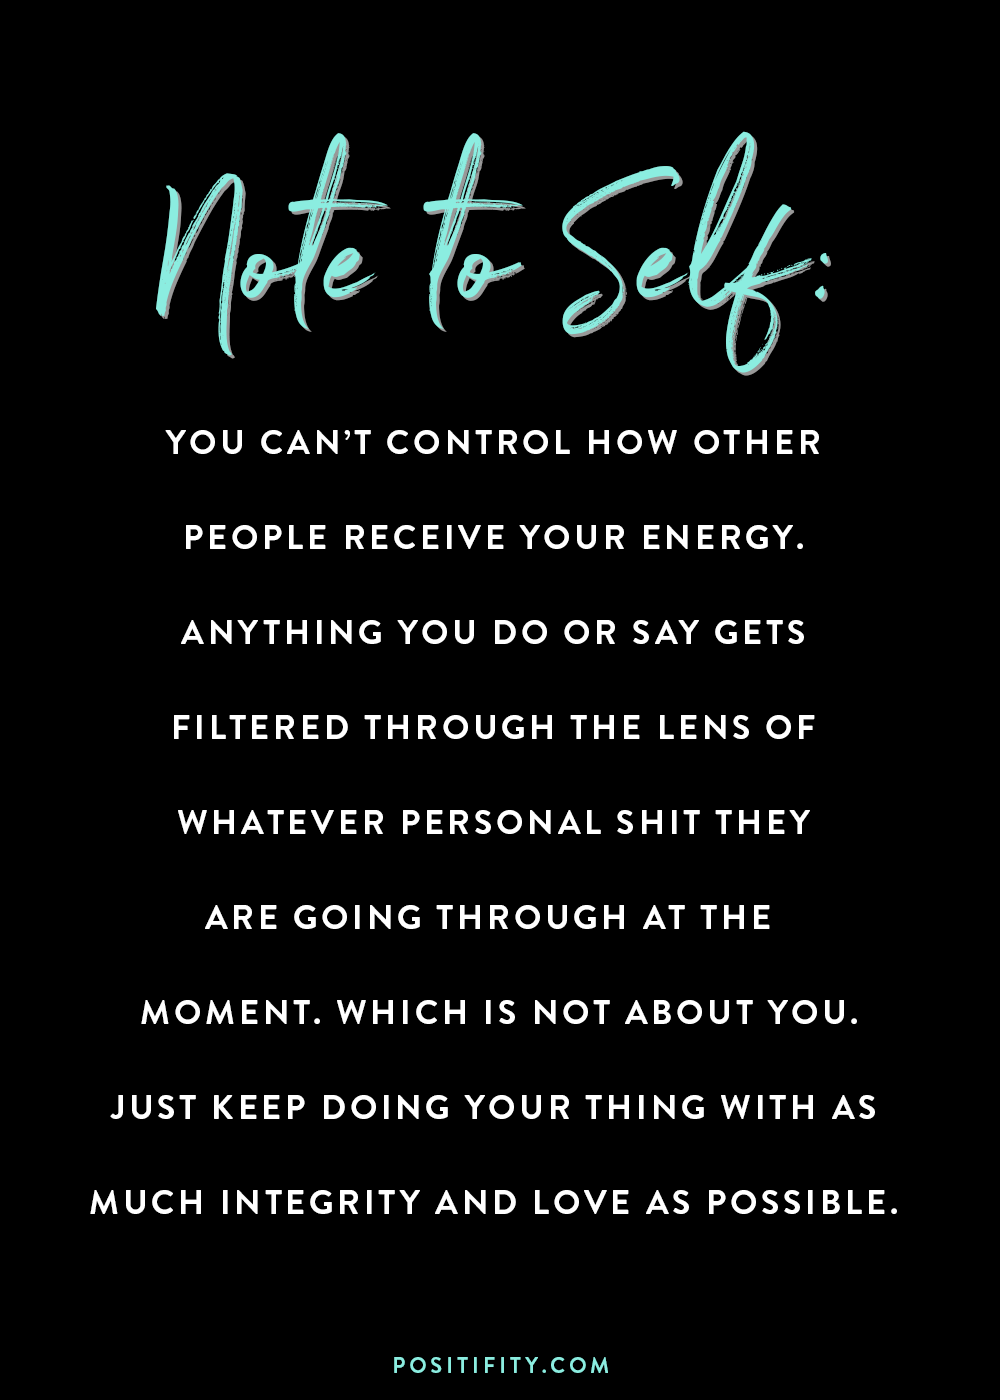 “Note to Self: You can’t control how other people receive your energy. Anything you do or say gets filtered through the lens of whatever personal shit they are going through at the moment. Which is not about you. Just keep doing your thing with as much integrity and love as possible.”